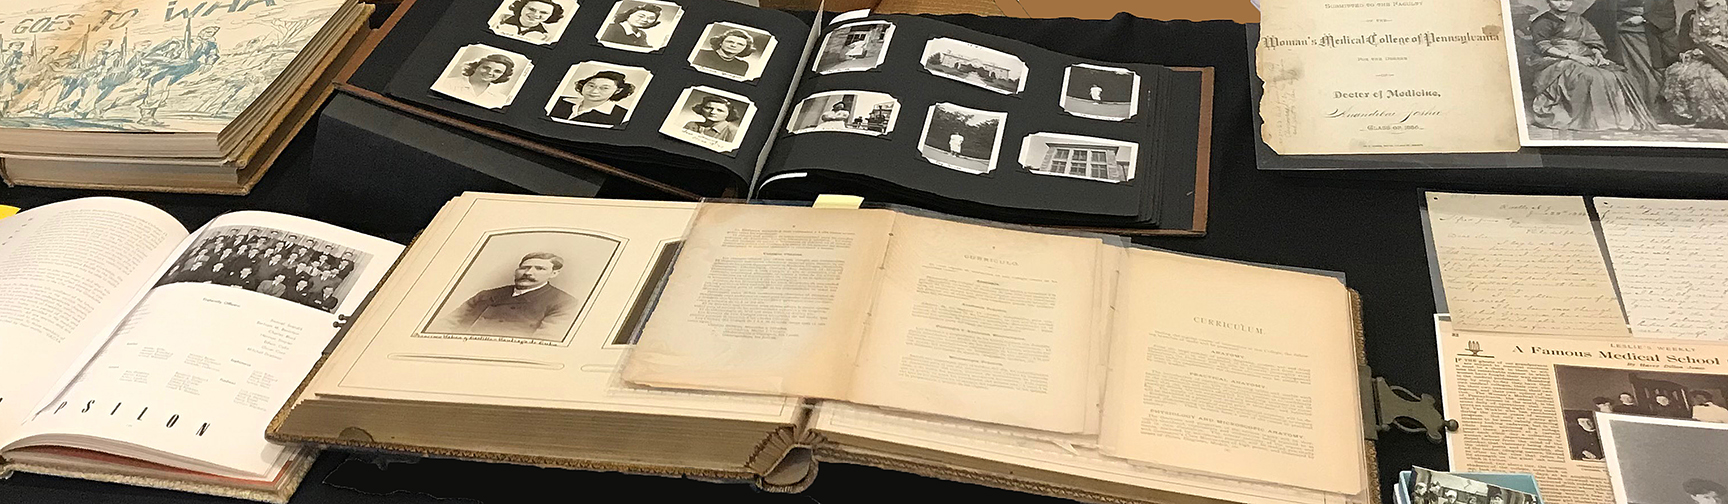 Exhibit of scrapbooks, photo album, yearbooks and other materials (The Legacy Center, Archives and Special Collections).